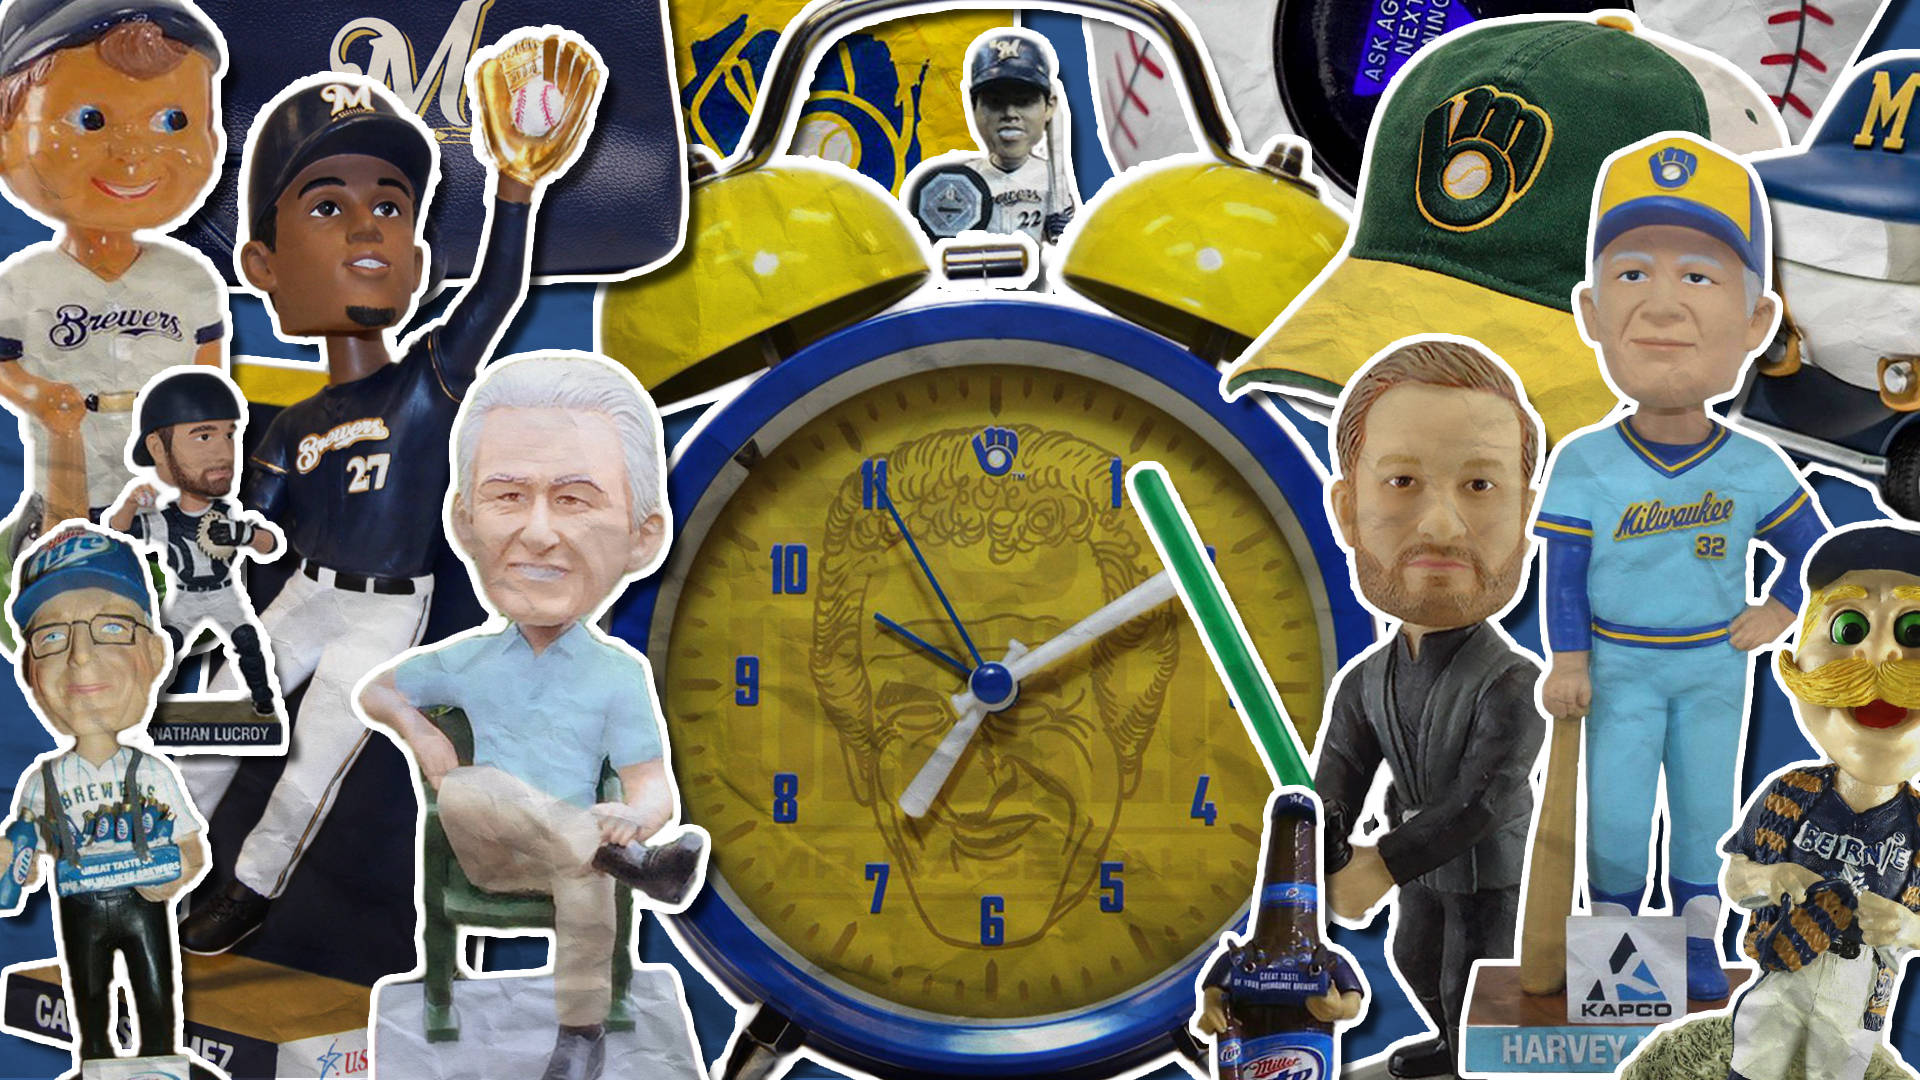 Milwaukee Brewers Bobbleheads Collage Background